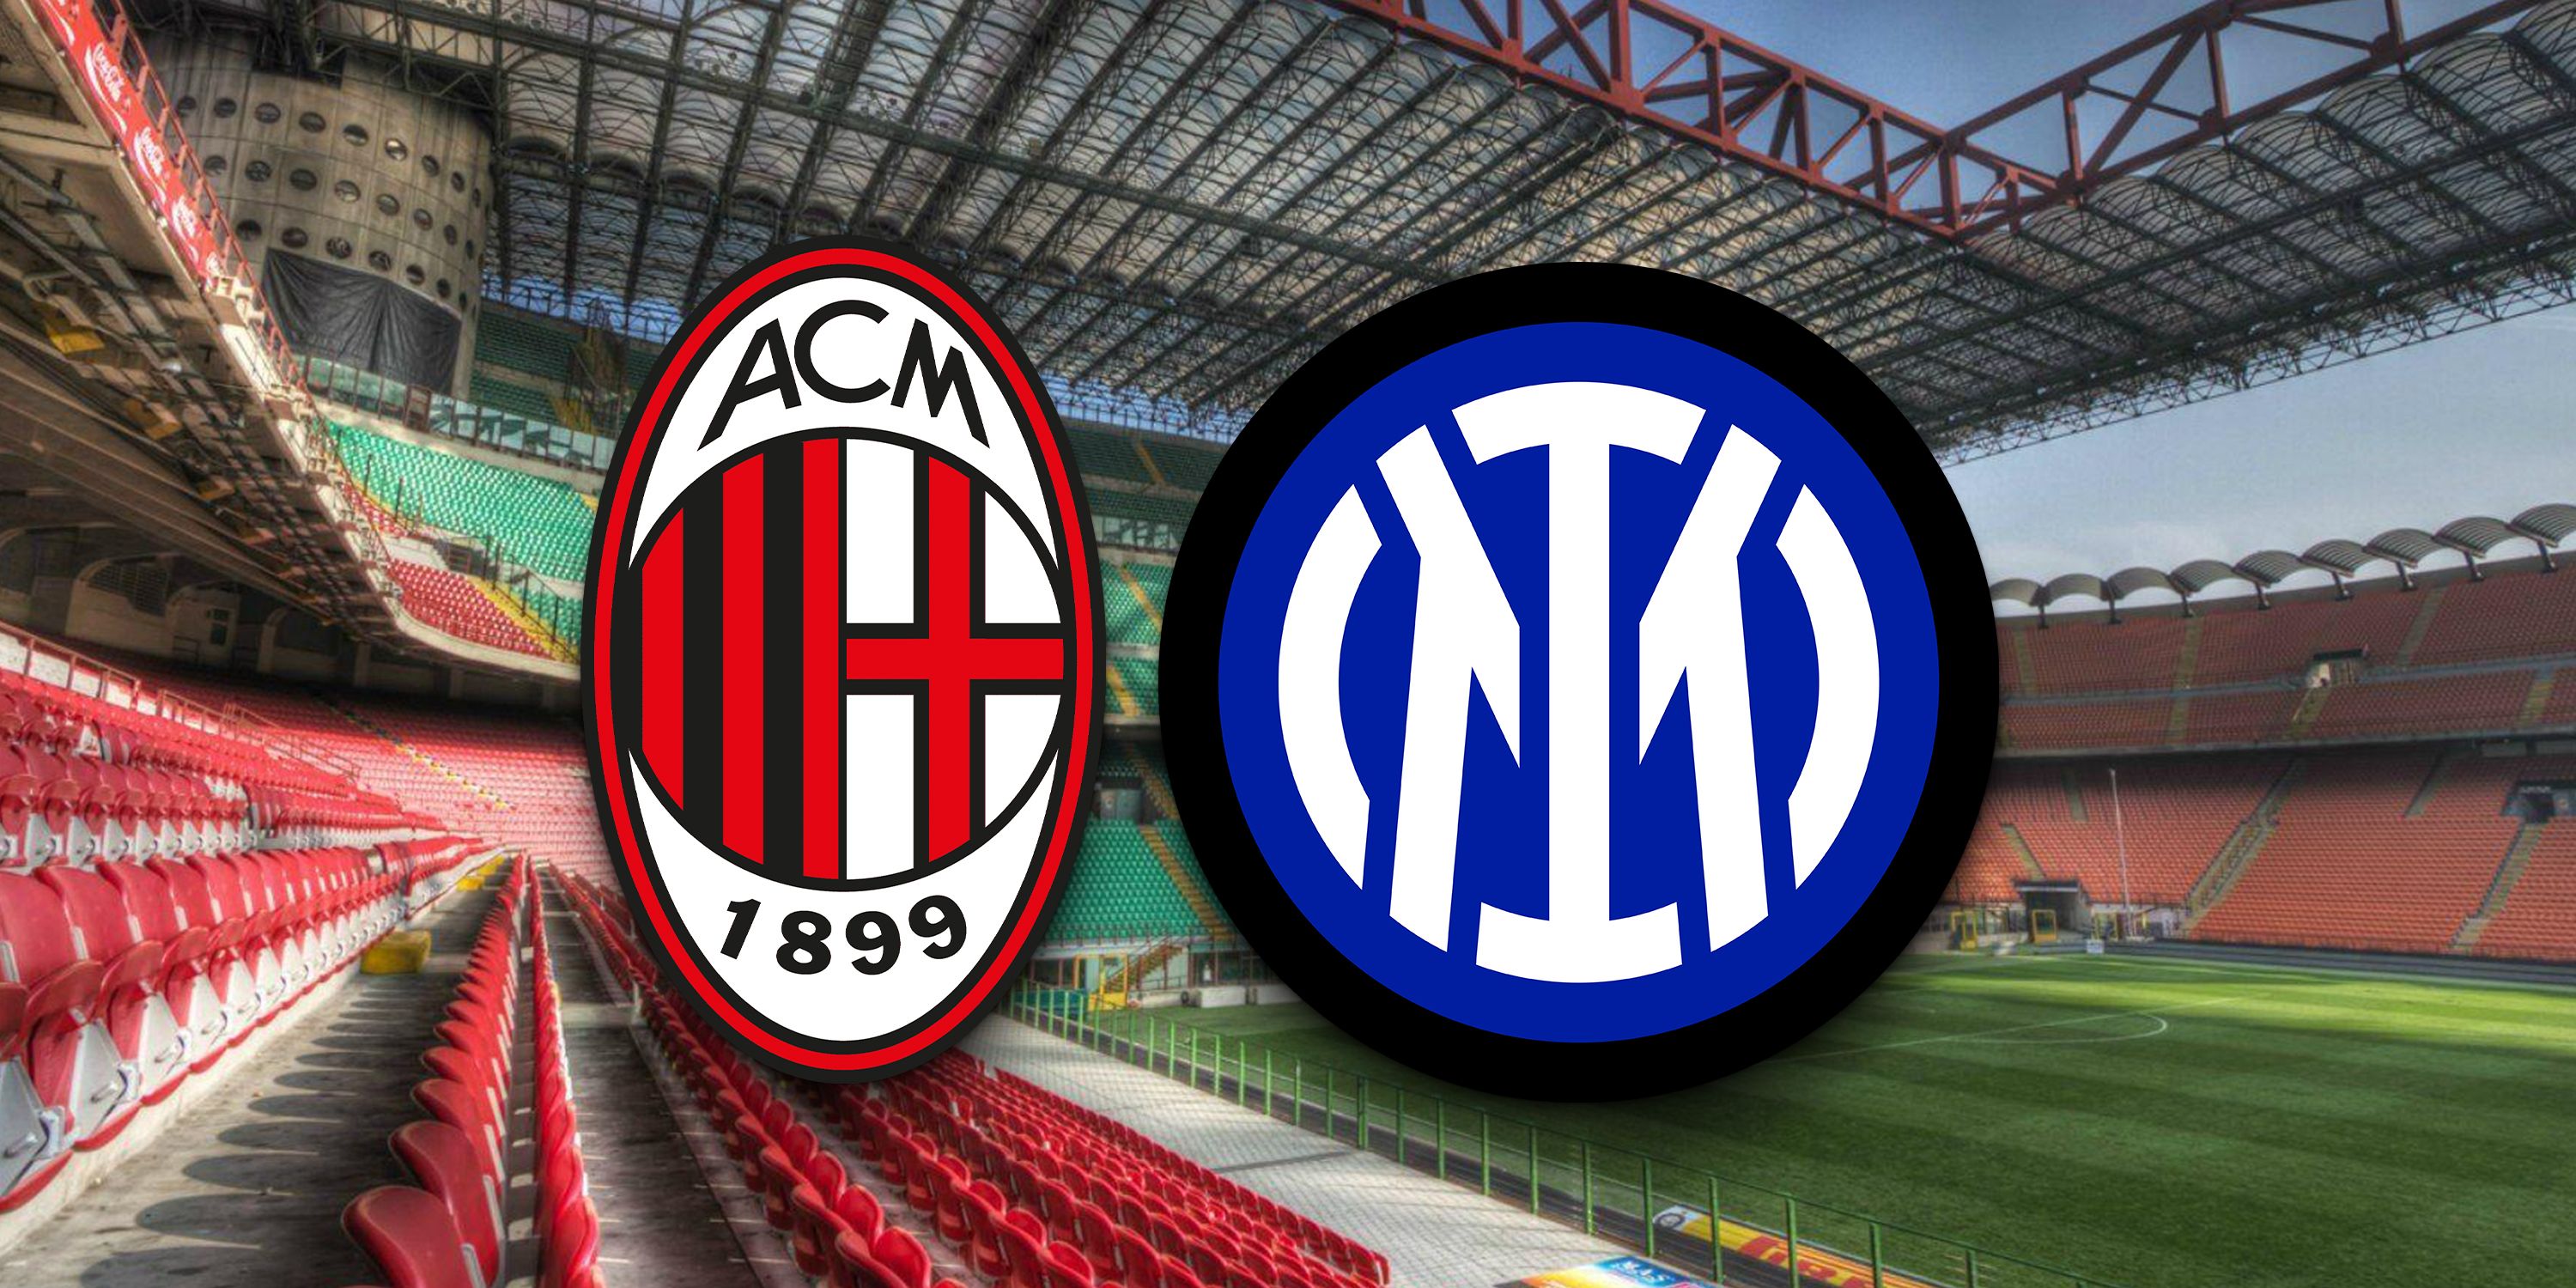 AC Milan and Inter Milan crests with the San Siro.